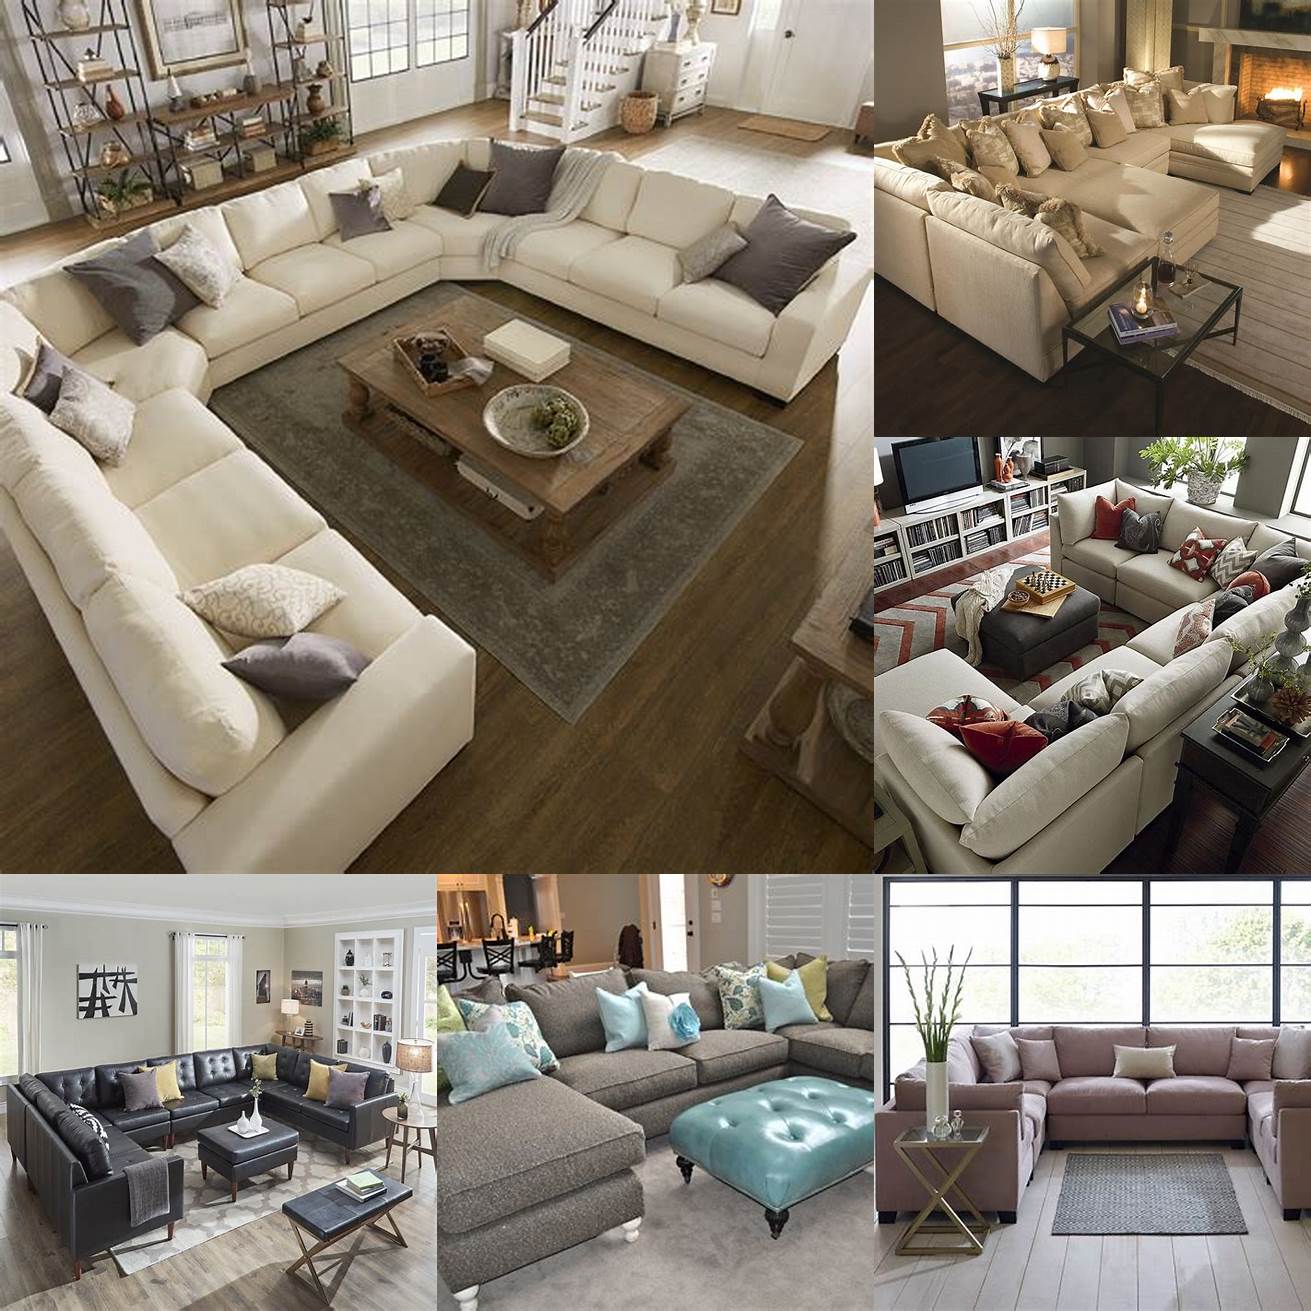 A neutral U shaped sectional sofa complements any living room decor